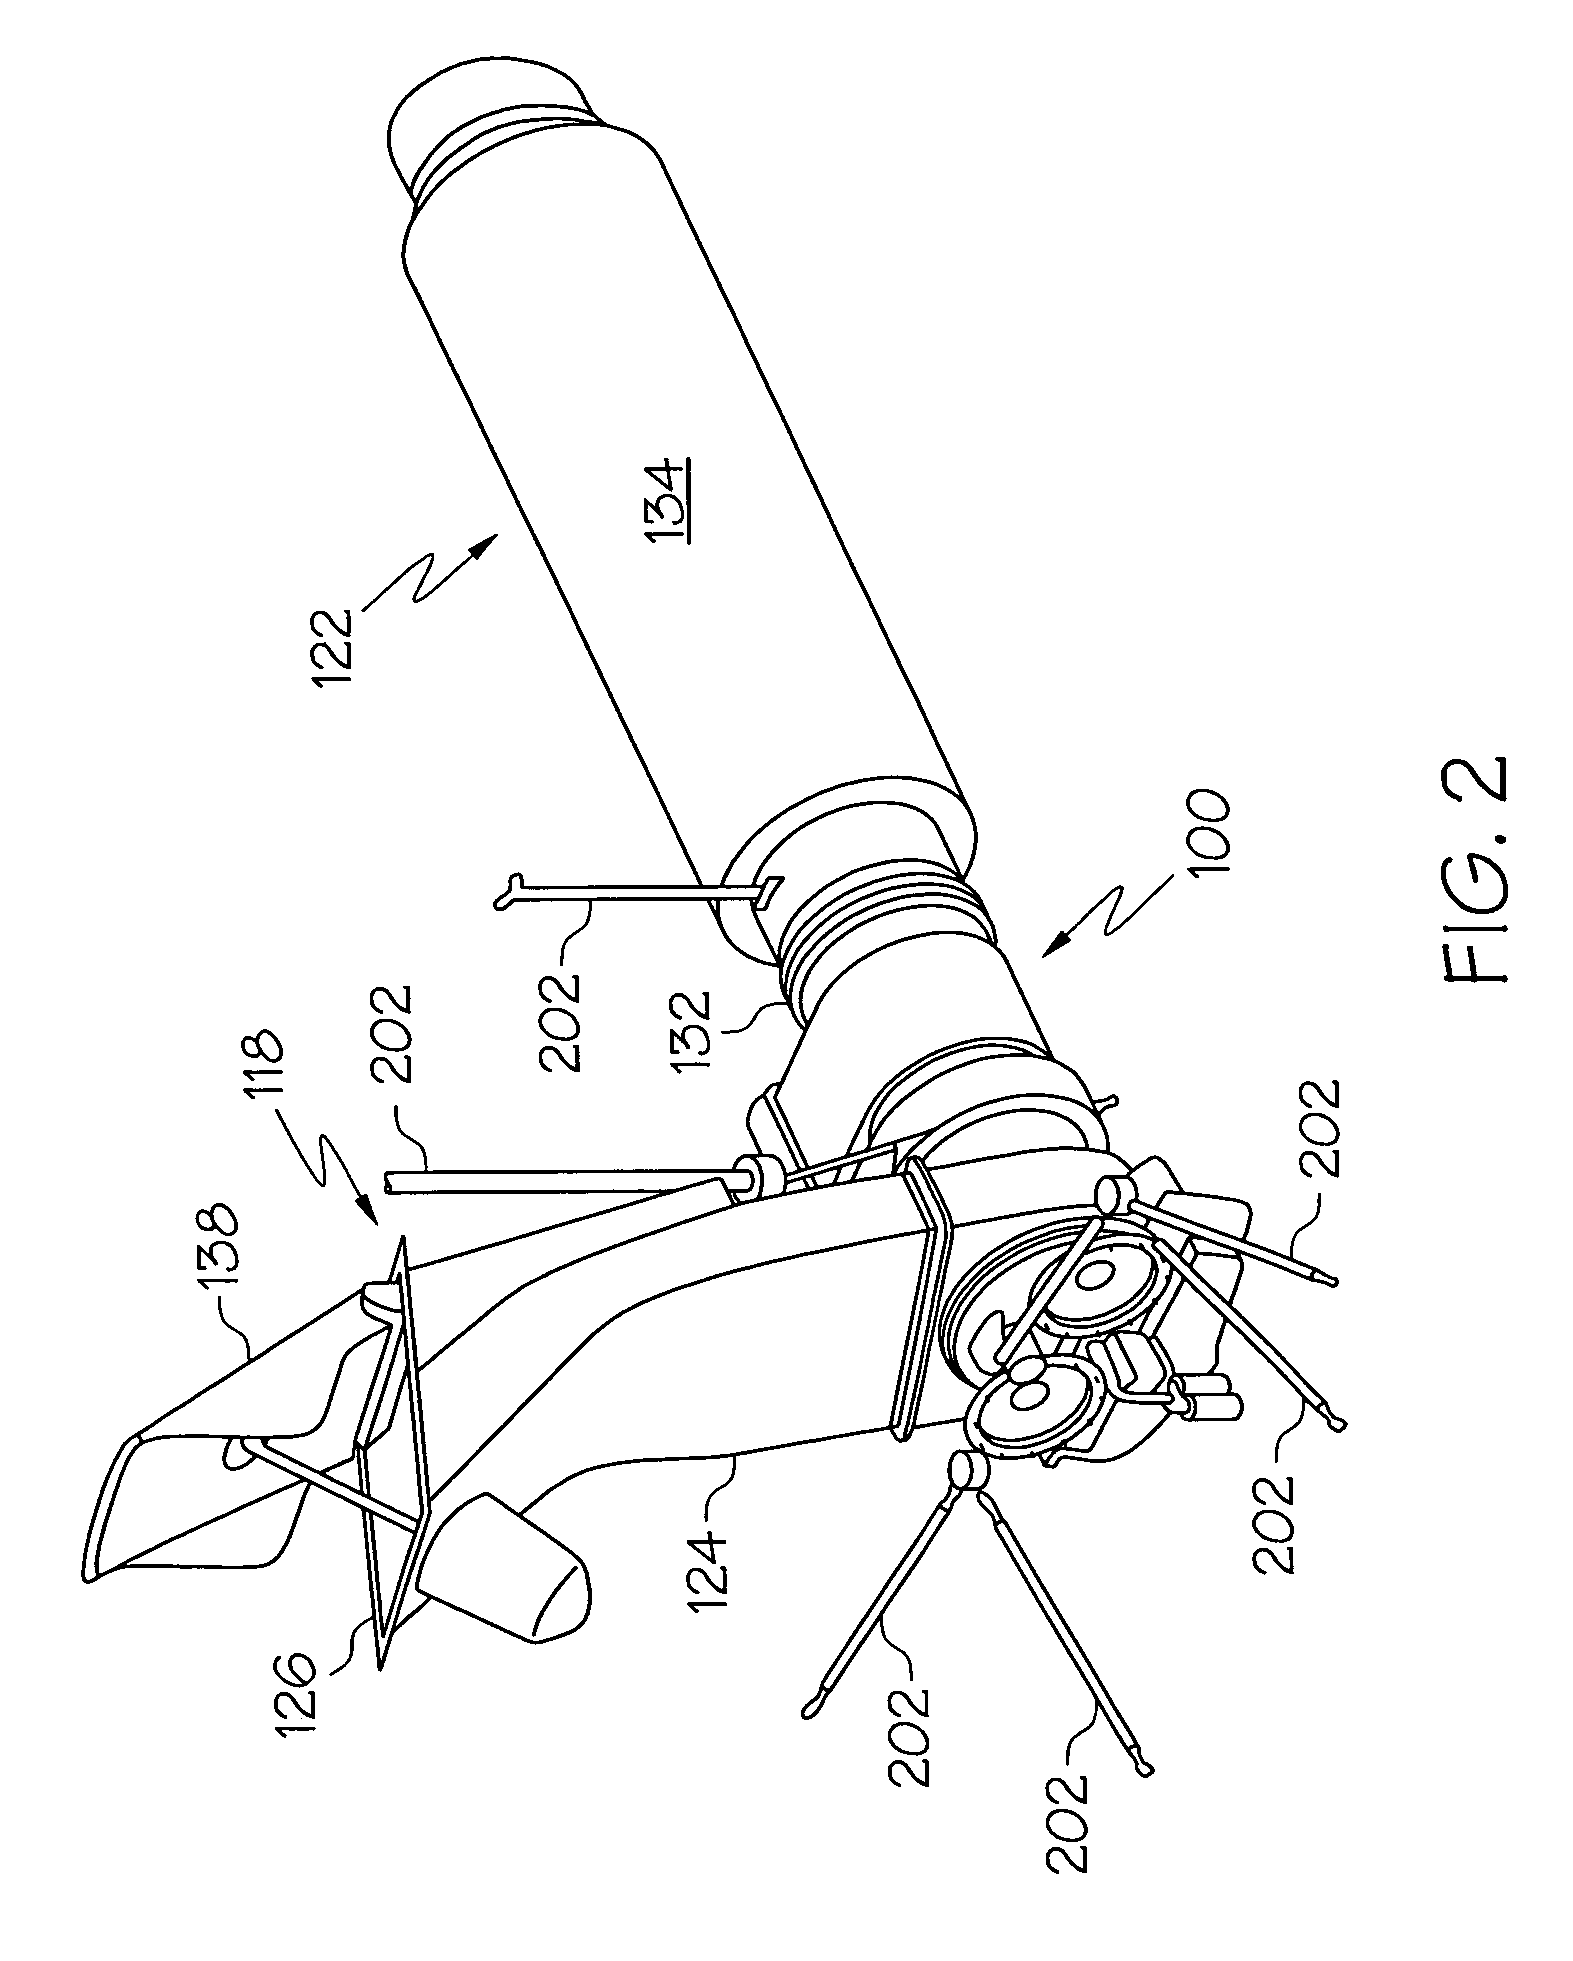 Auxiliary power unit inlet door position control system and method